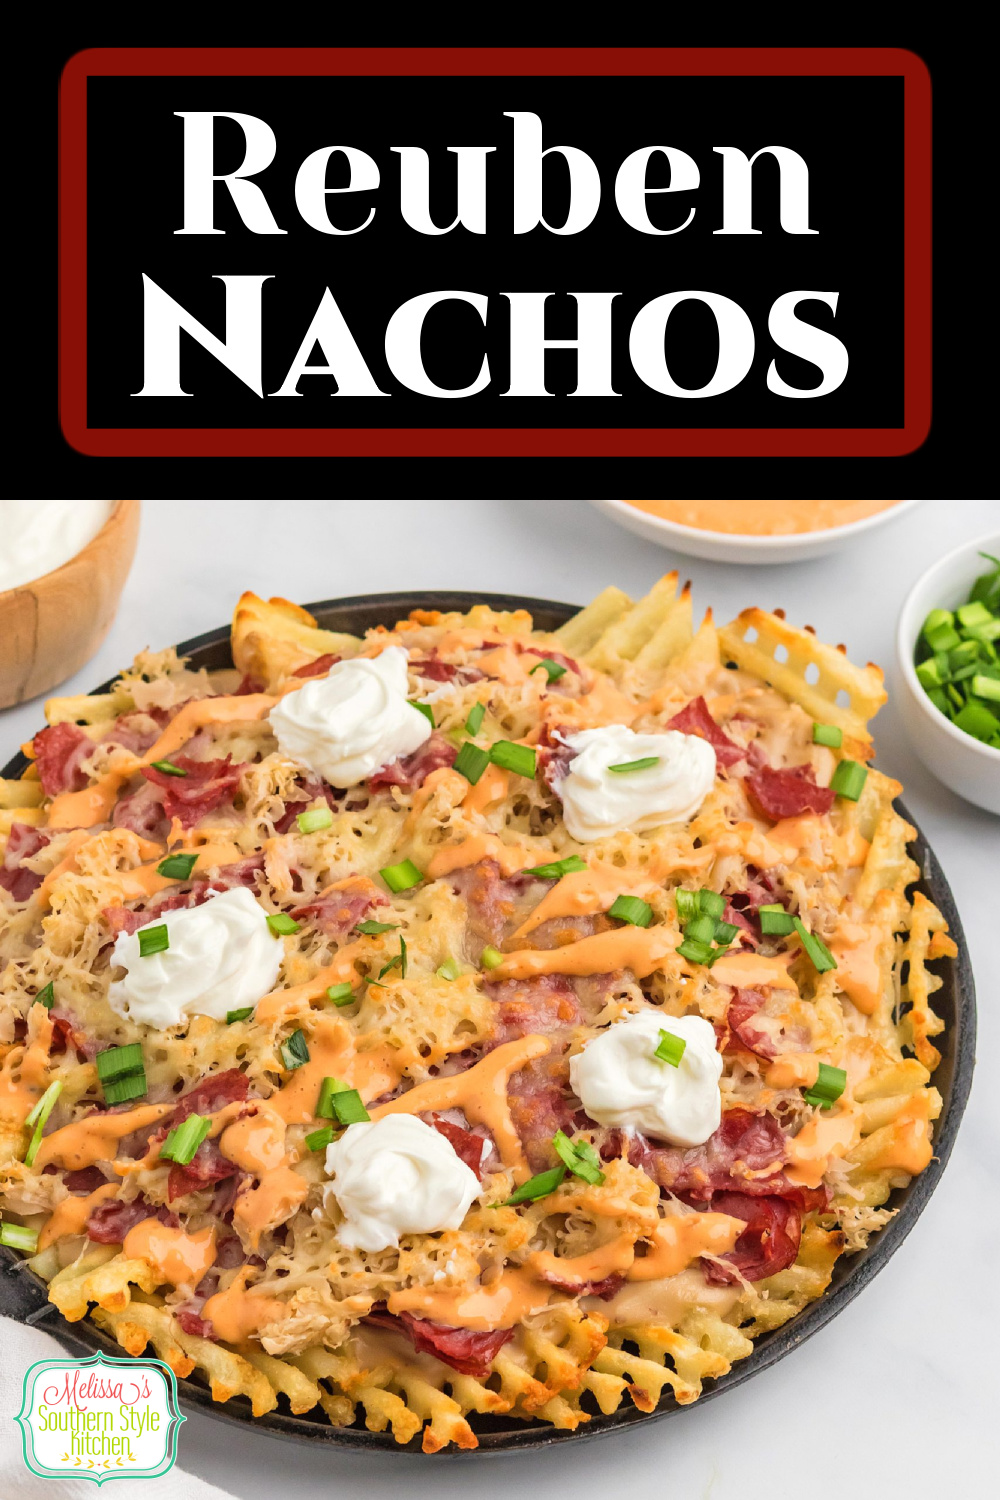 This Reuben Nachos Recipe is pub-style food featuring waffle fries drizzled with a beer cheese sauce #irishnachos #reubens #reubennachos #nachosrecipes #wafflefries #potatoes #appetizers #gamedayrecipes #cornedbeef #reubenrecipes #stpatricksdayrecipes #stpaddys via @melissasssk